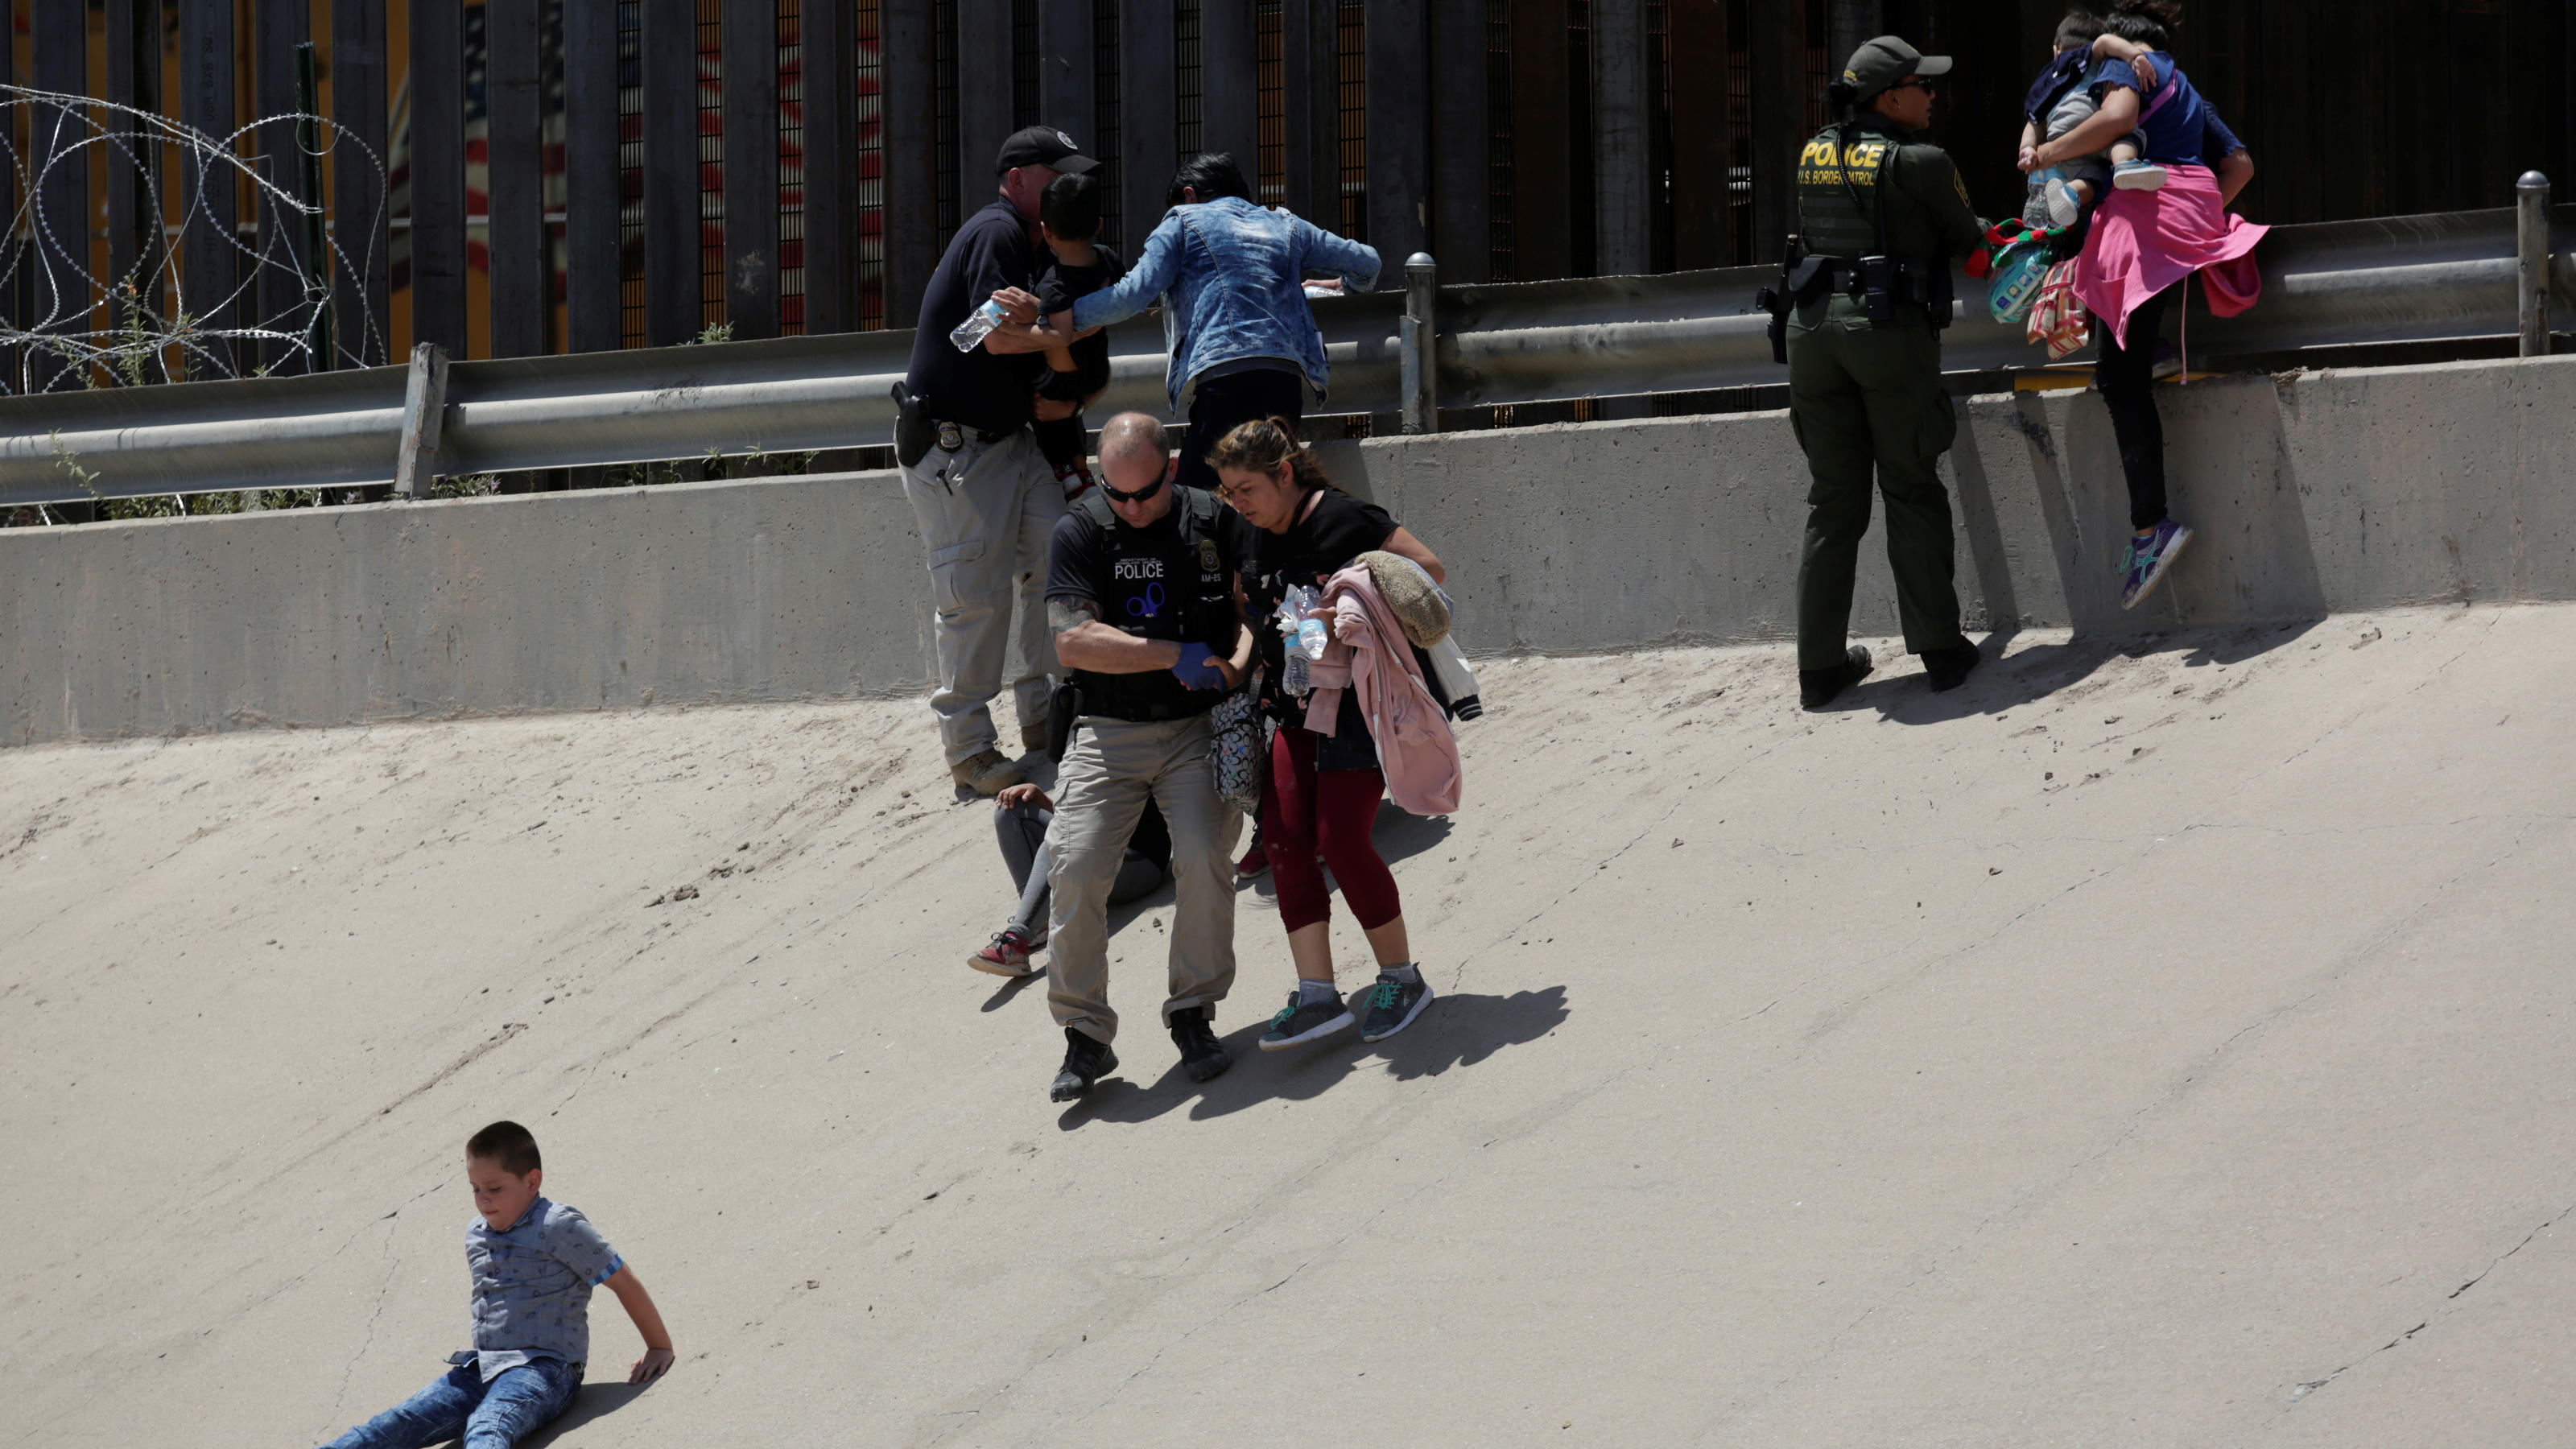 Migrant women with their children are detained by the U.S. Customs and Border Protection officials after crossing illegally into El Paso, Texas, U.S. and turning themselves in to request for asylum, as seen from Ciudad Juarez, Mexico July 13, 2019. R